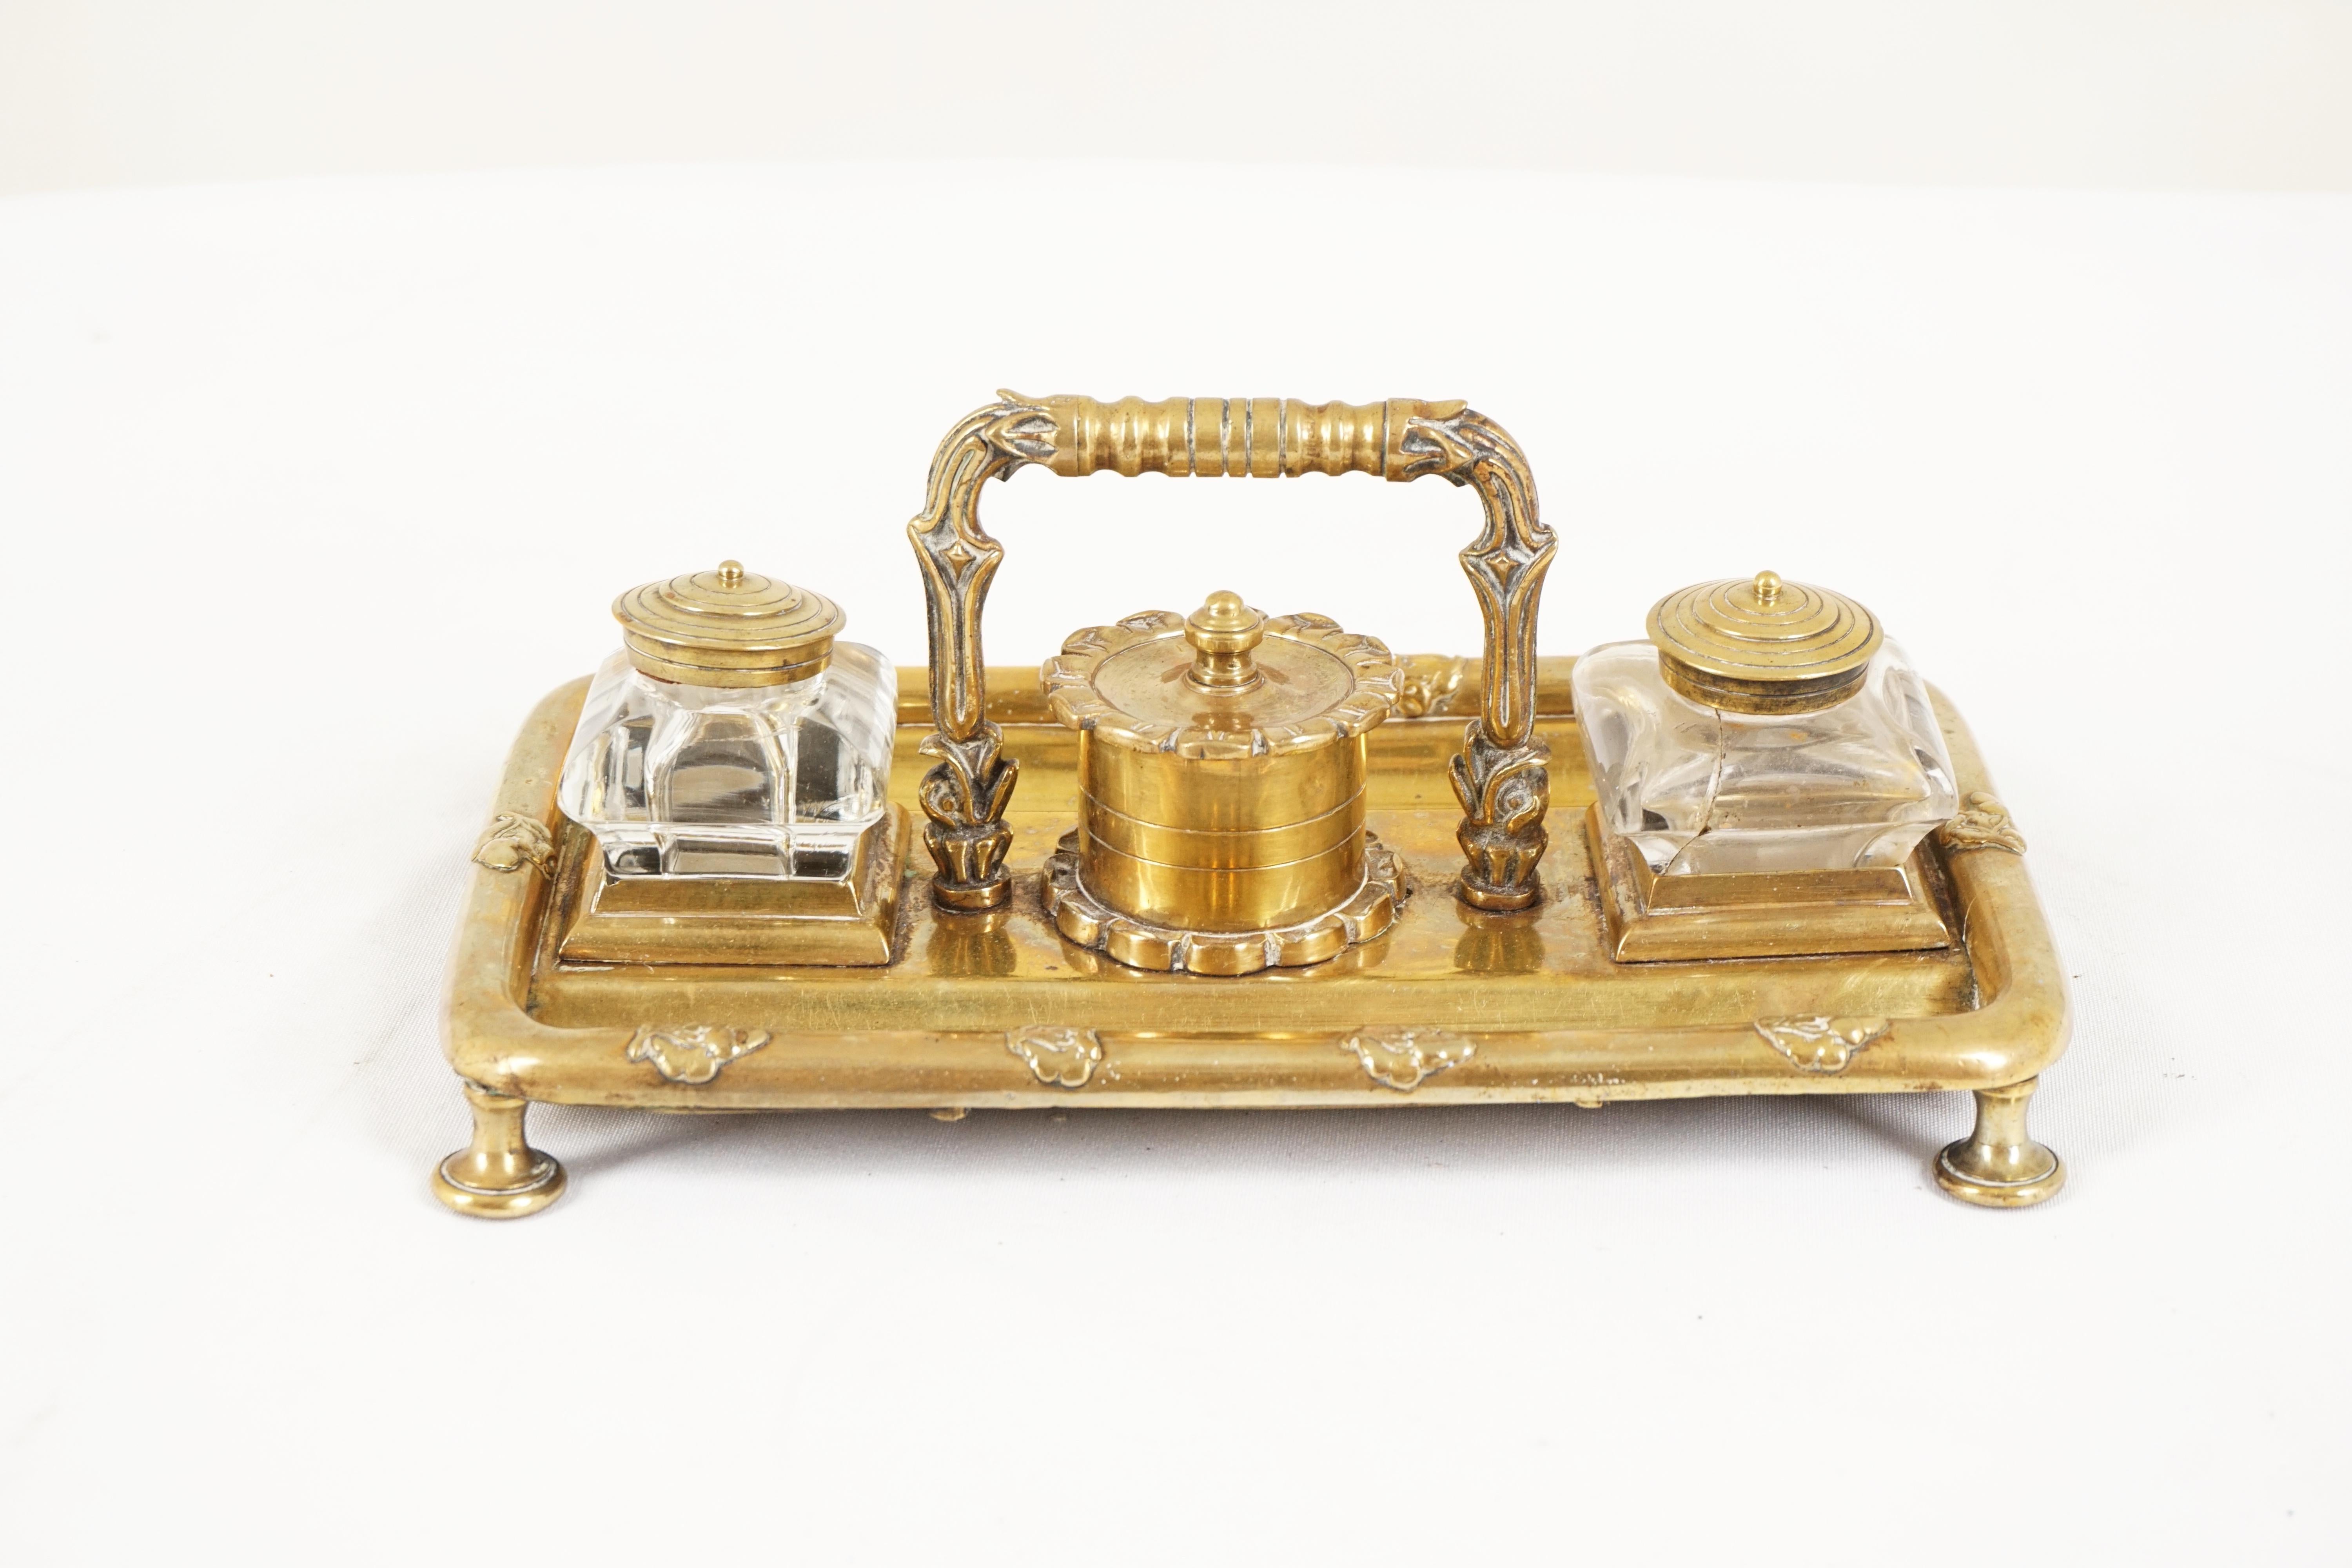 Antique brass double inkwell, Scotland 1900, H545

Scotland 1900
Brass and glass
Inkwell comes with stamp holder and lid
Two glass inkwells (one has a crack and the other has a chip), with brass lids
Two pen rests decorated with nut